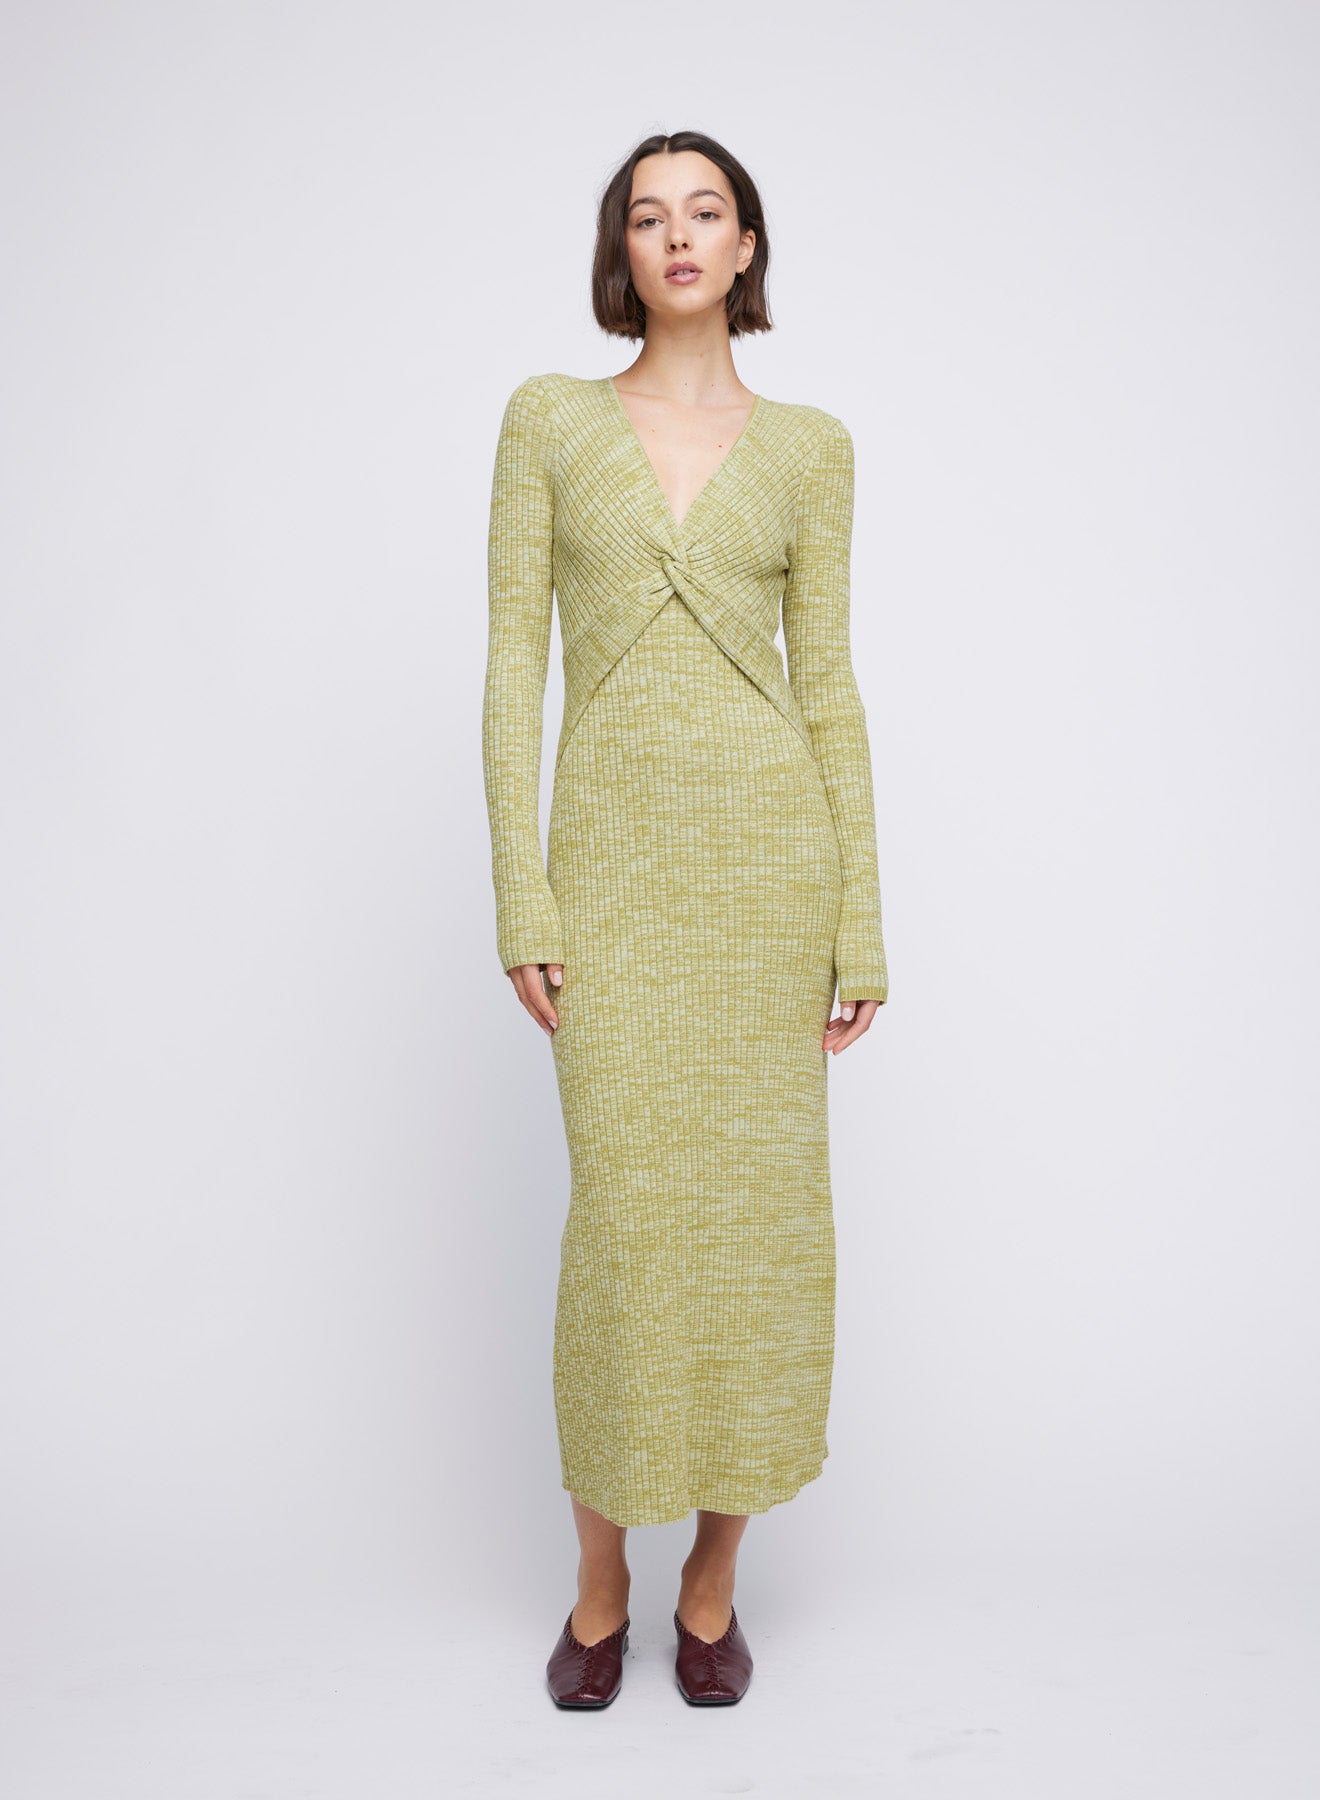 Long Sleeve ANNA QUAN Knit Maxi Dress, featuring a centre front twist, long sleeves and hem finishing just above the ankle. Elevate your everyday style with this chic and comfortable piece. Day dress, work dress, dress for work, winter dress, everyday dress.